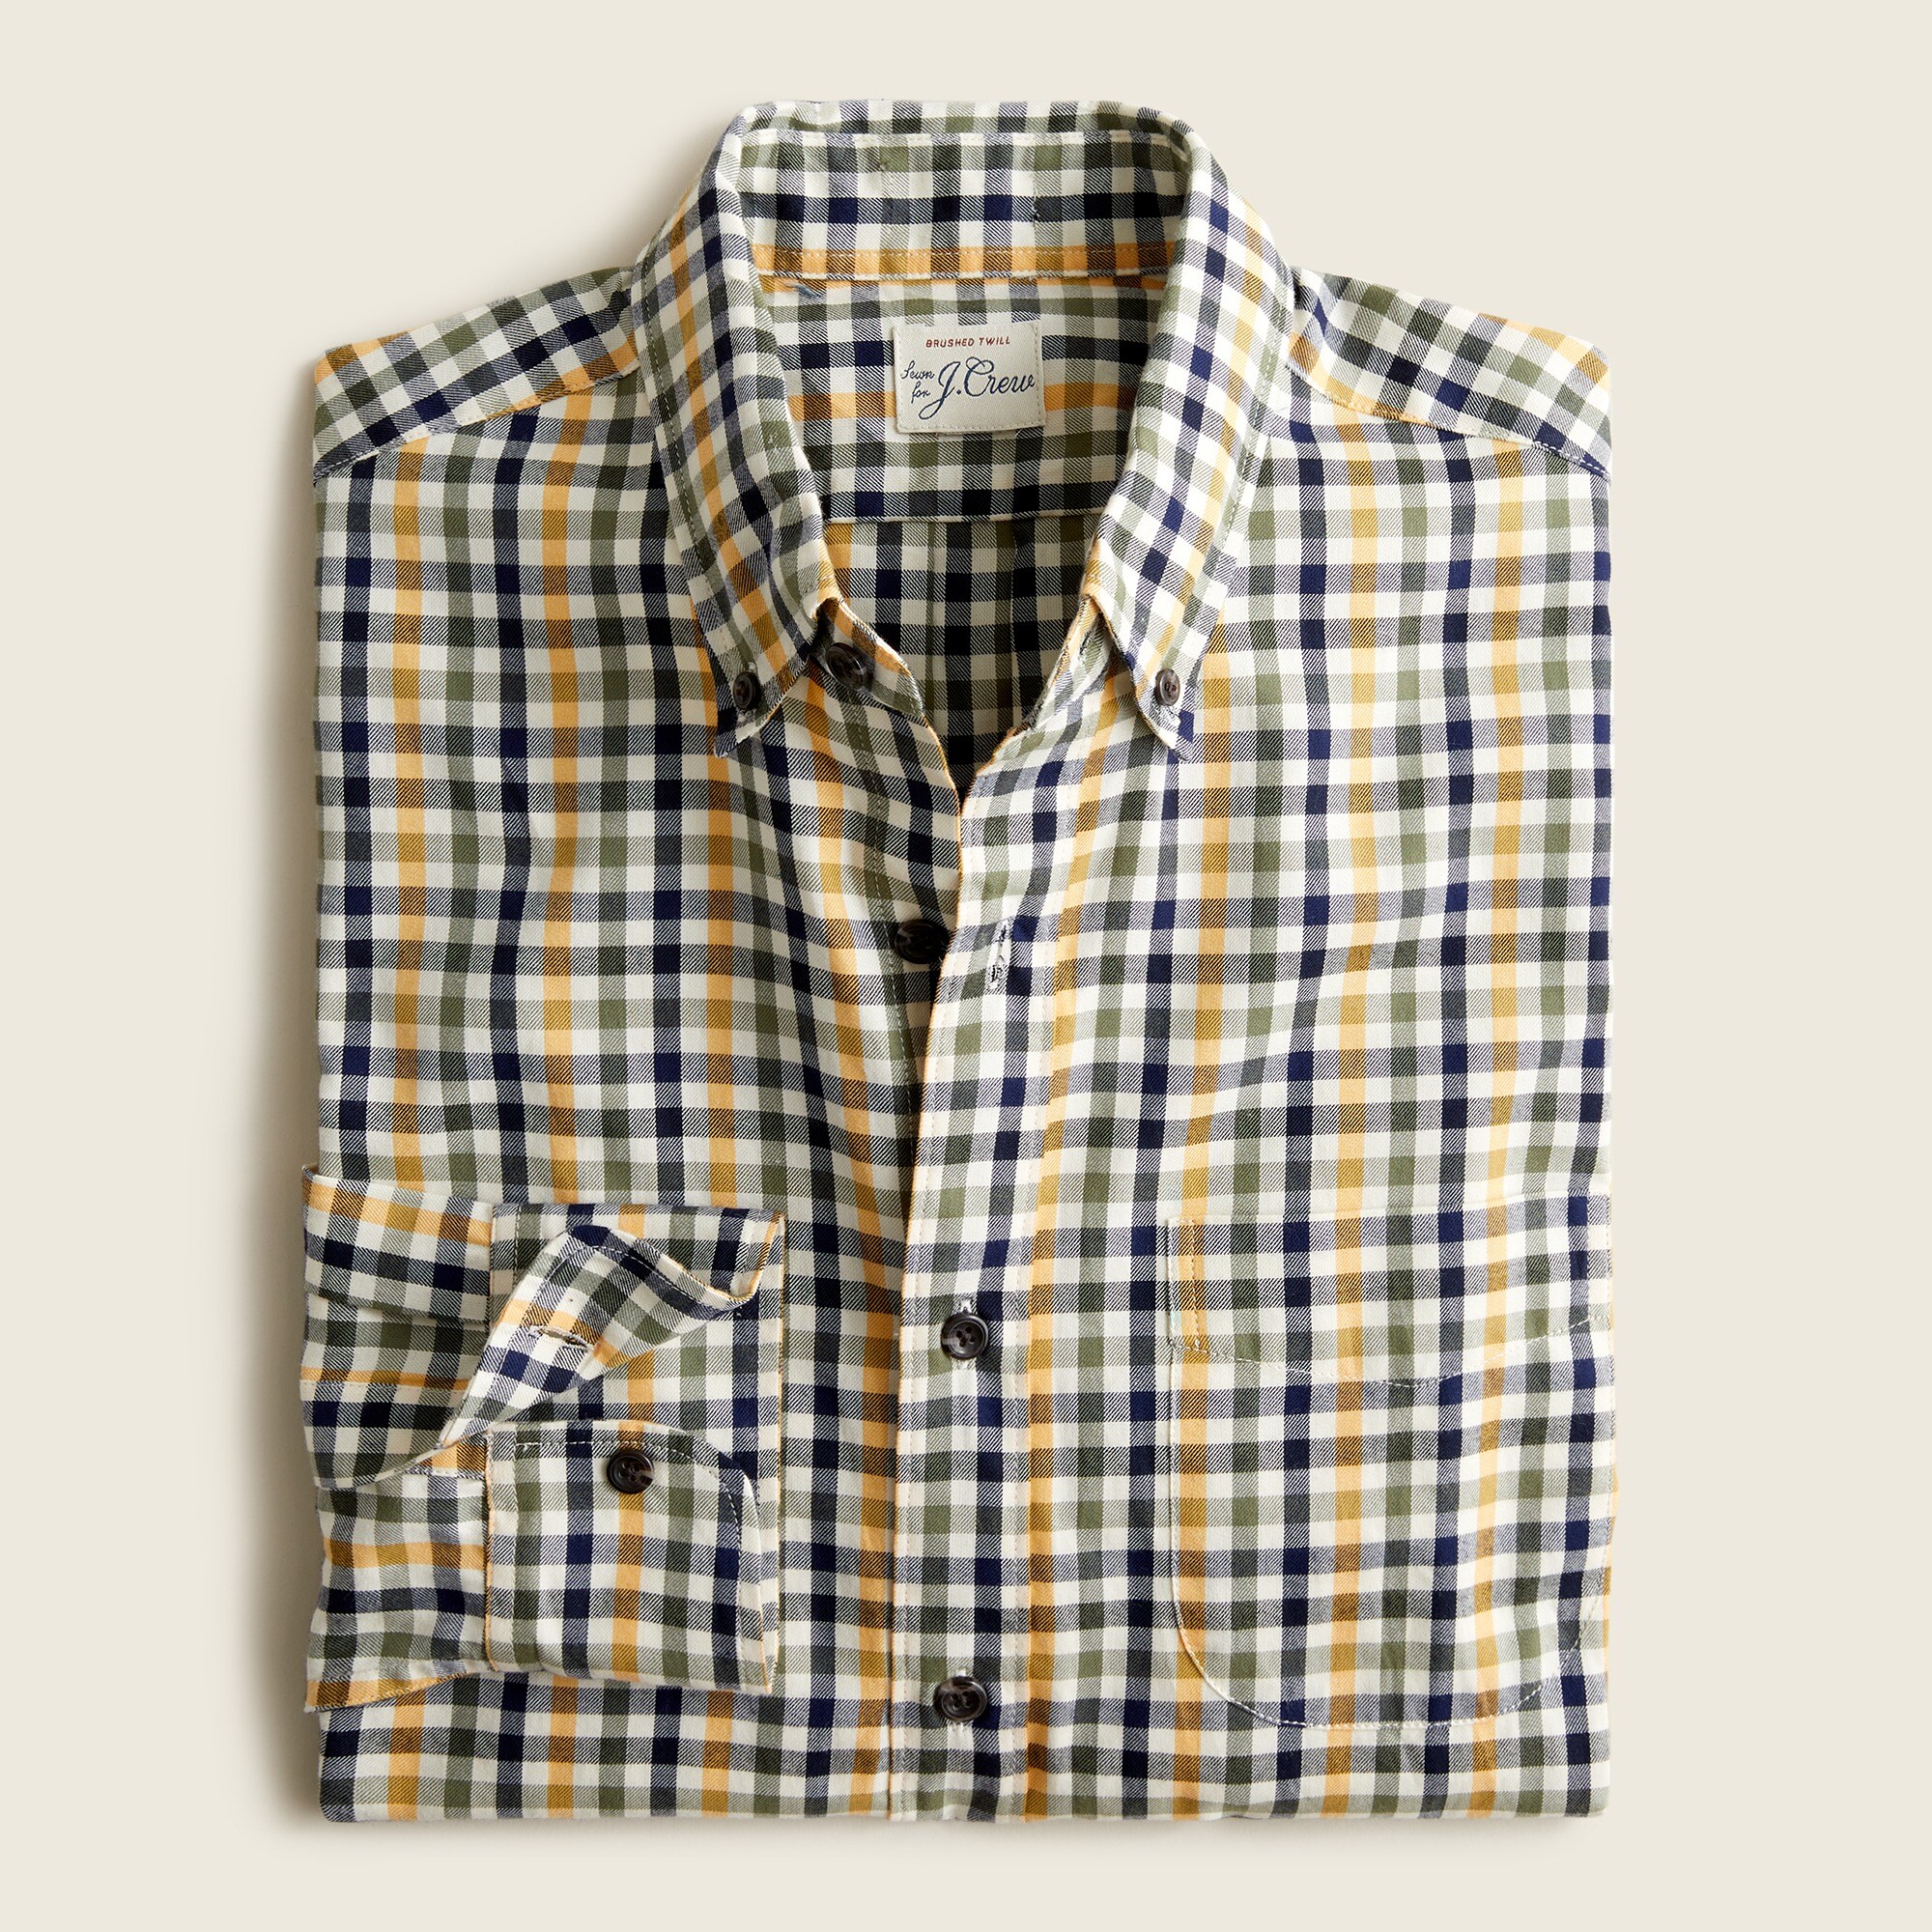 Jcrew Brushed twill shirt in plaid